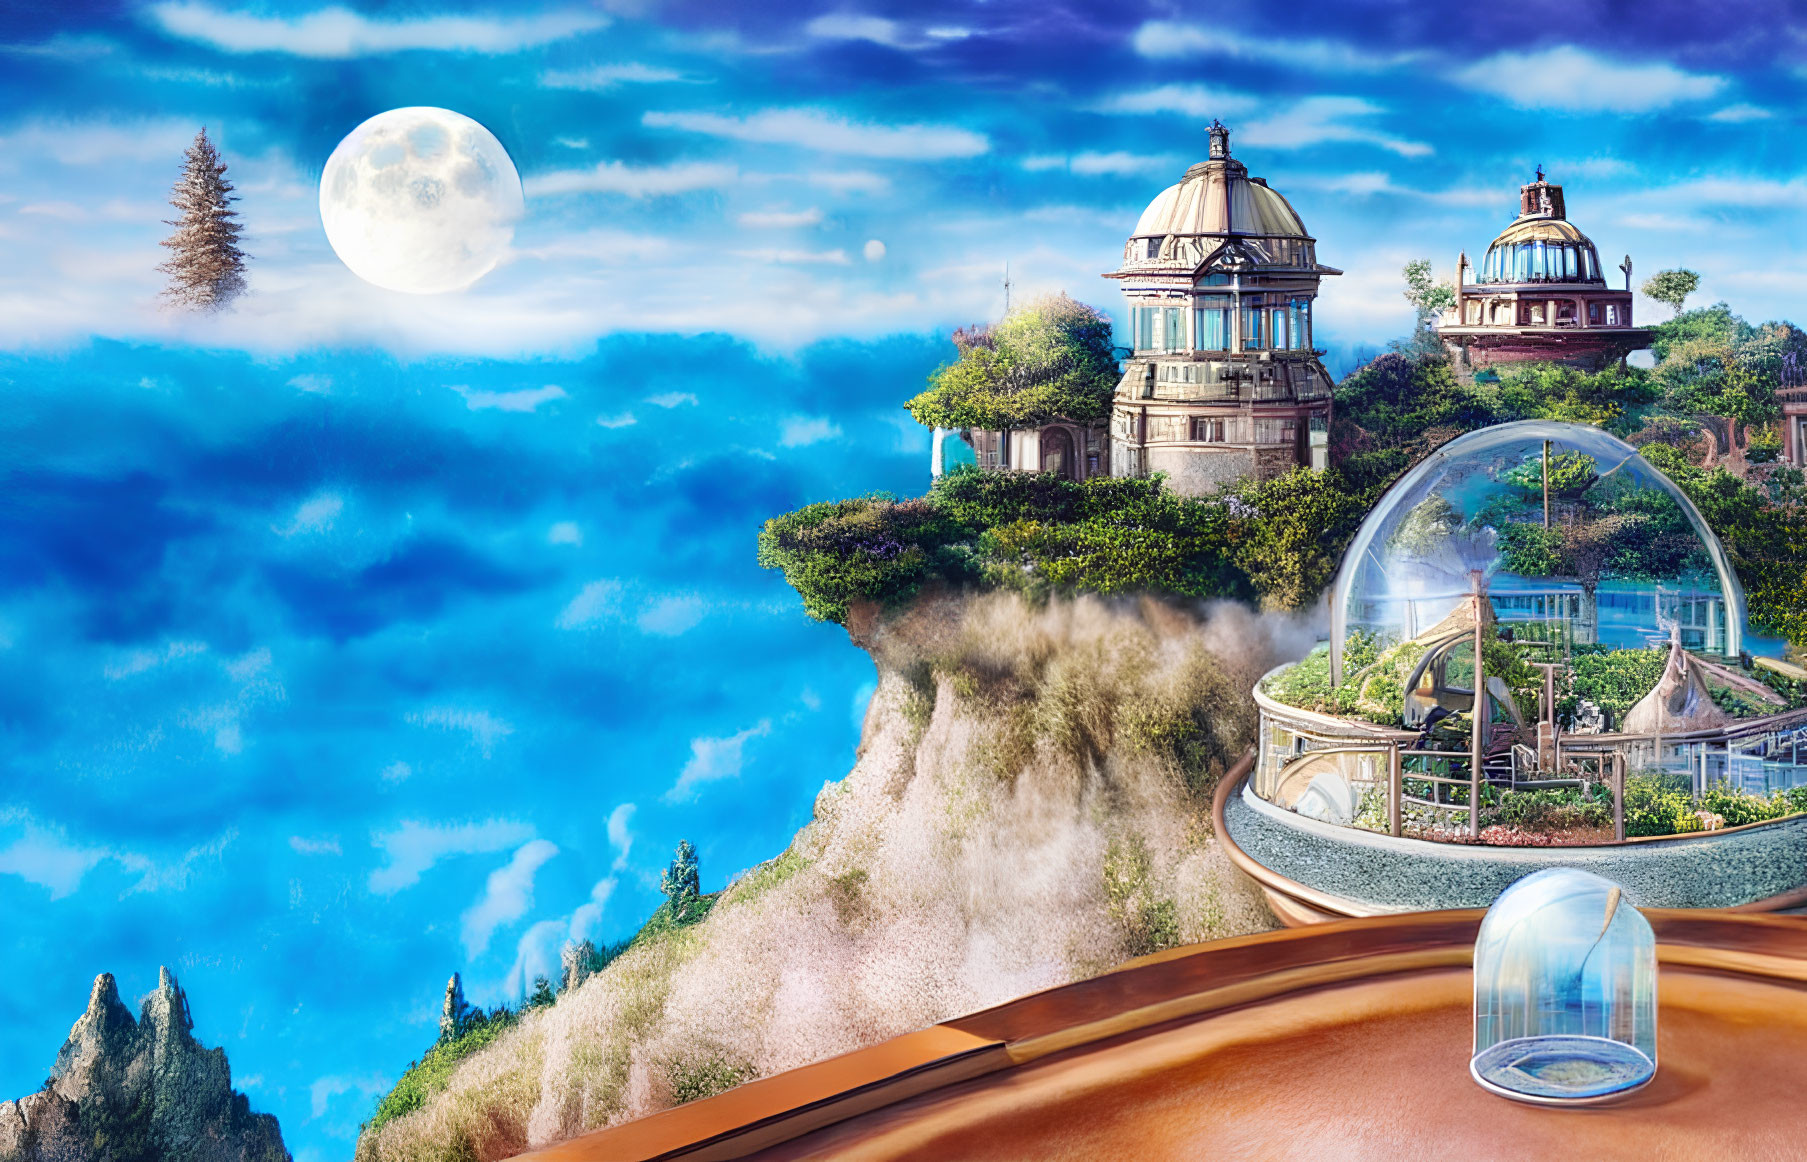 Fantasy landscape with cliff-top domed buildings under a full moon, transparent bubble structure, and cloudy